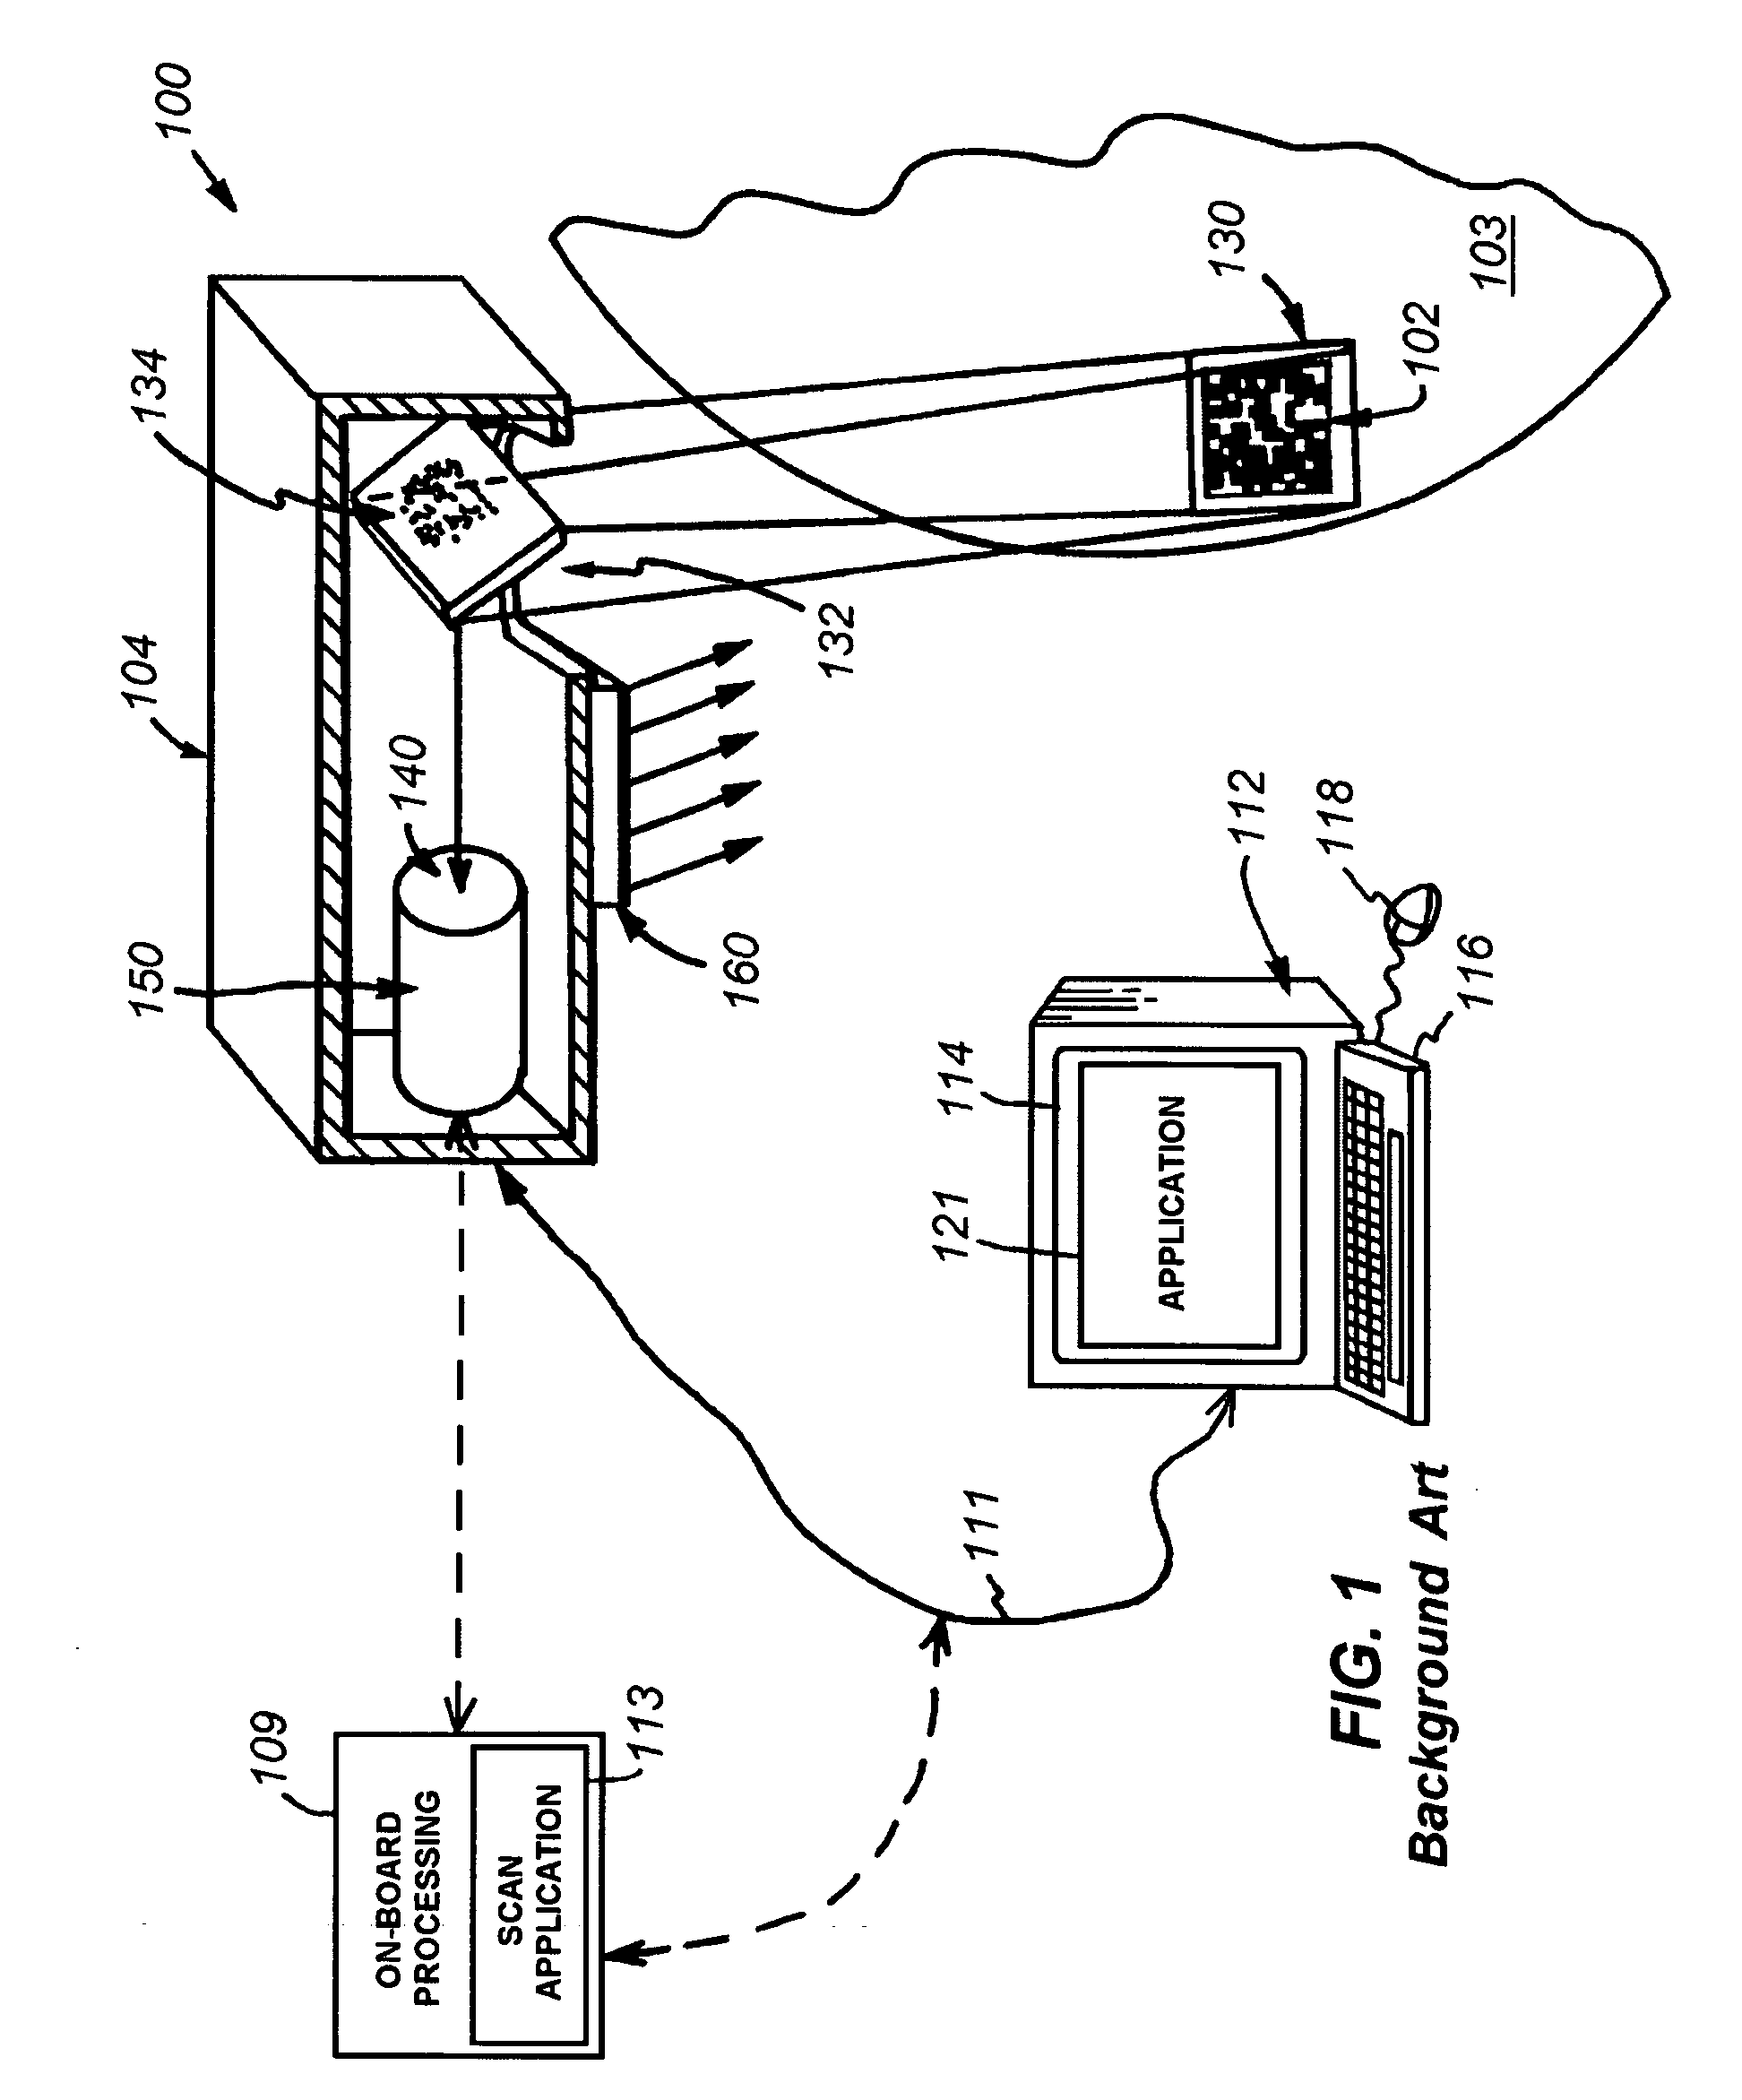 System and method for employing infrared illumination for machine vision